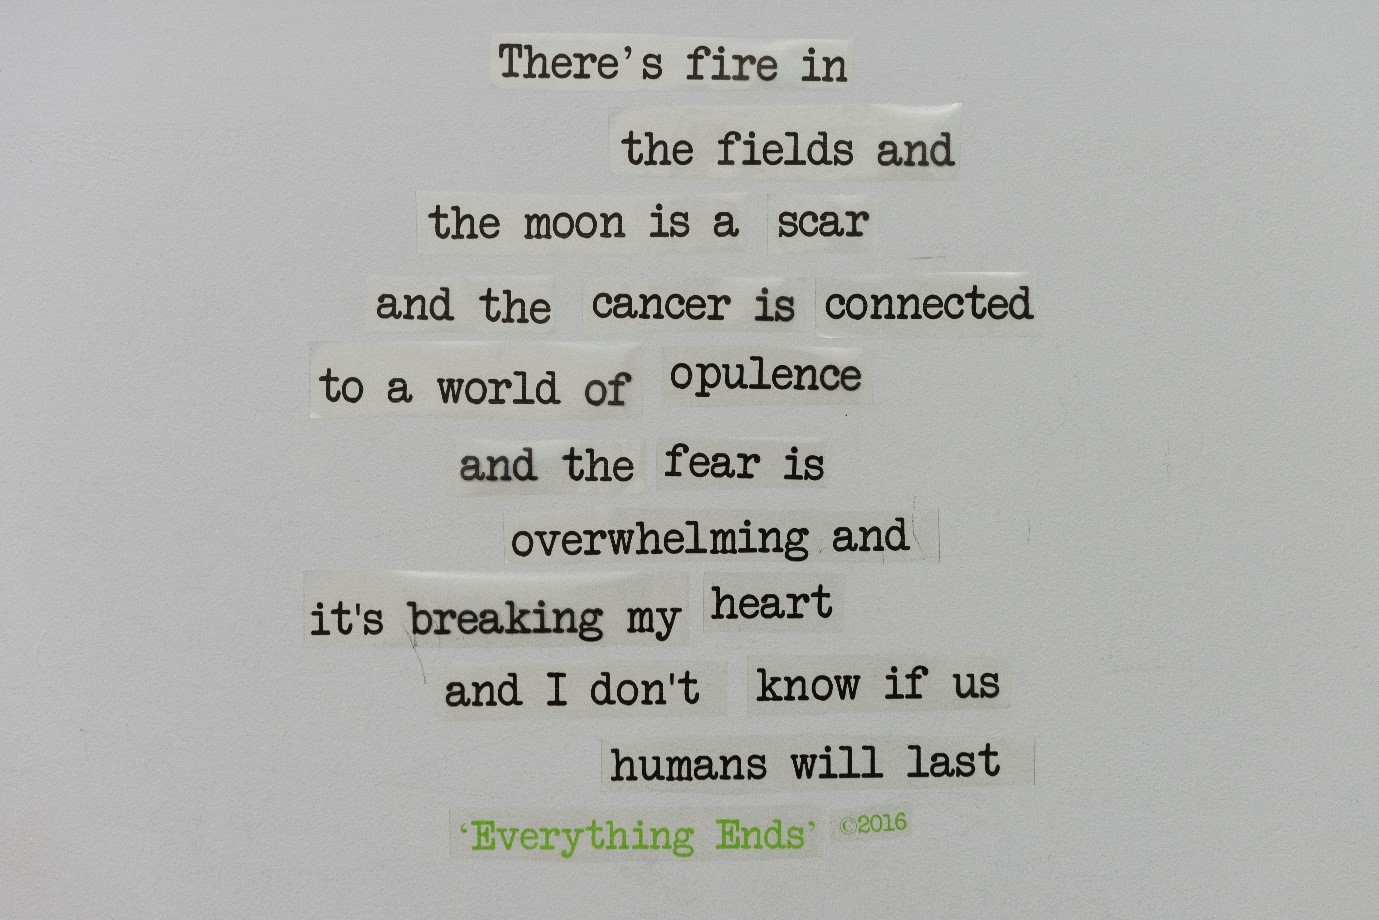 This changes everything poem